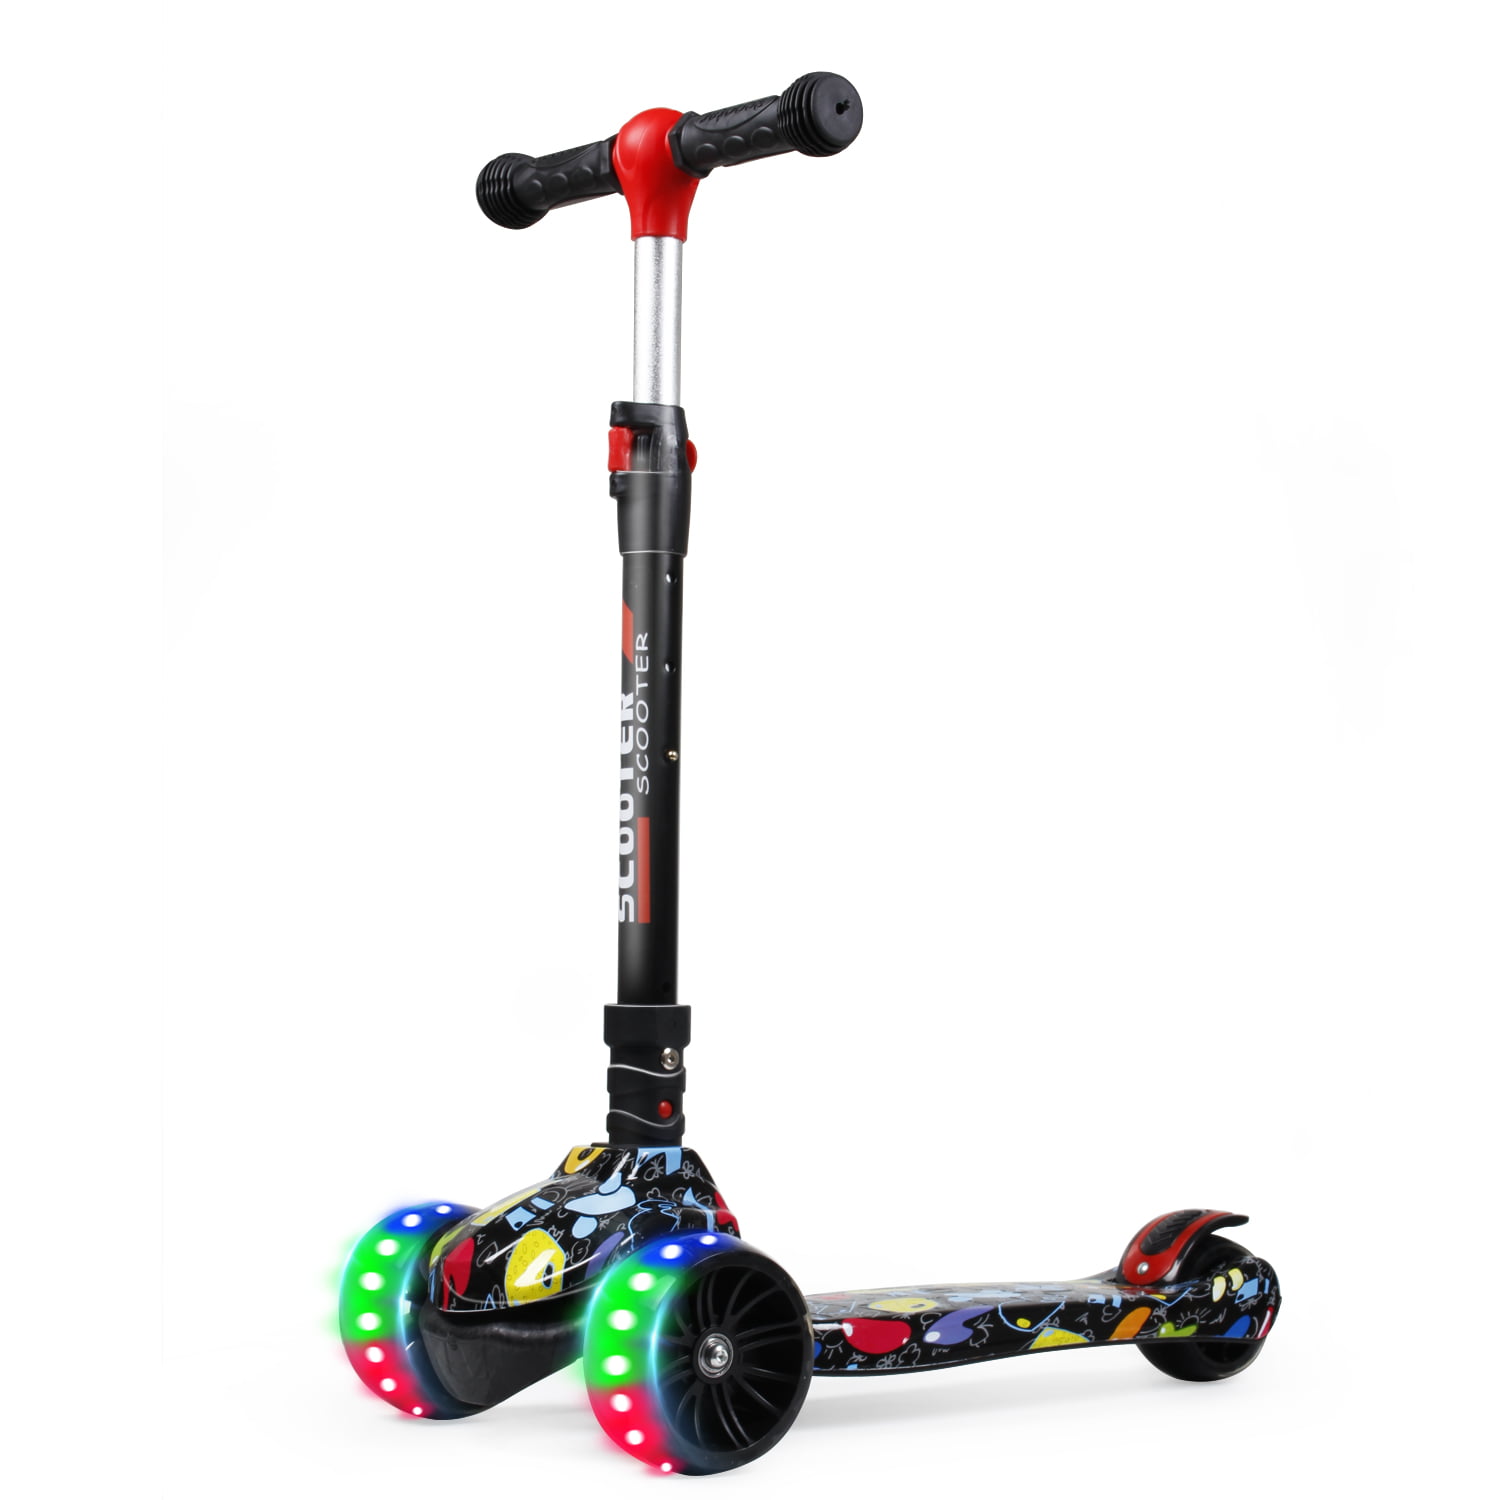 3 Wheel Adjustable LED Kick Scooter Deluxe Height T-bar Glider For Toddler Kids 